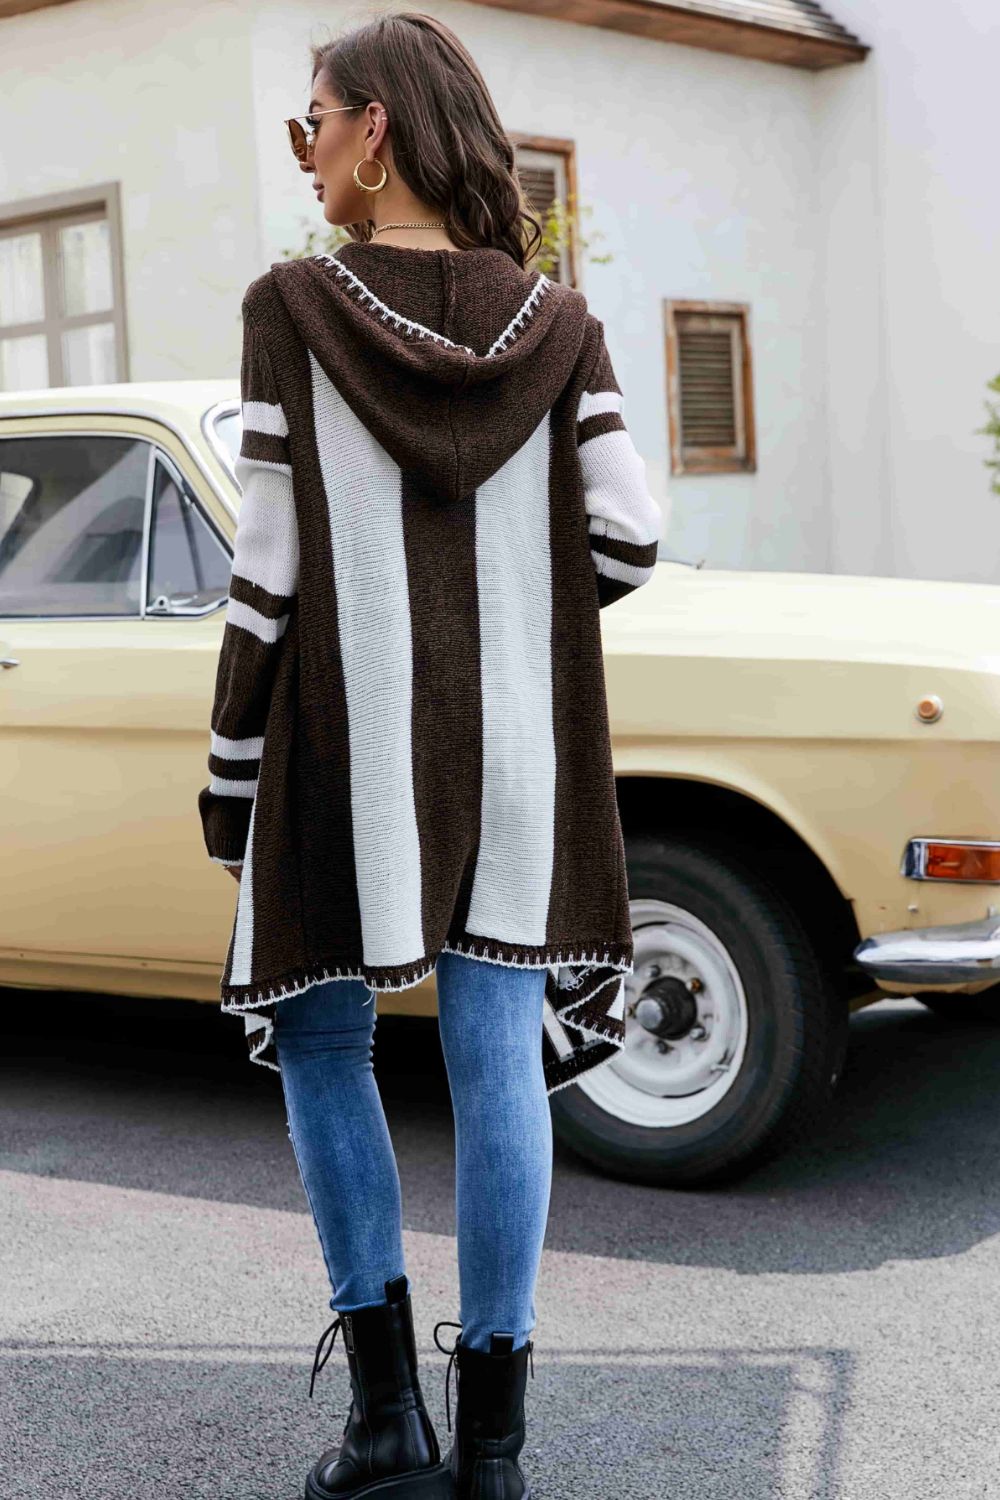 Long Hooded Oversized Knit Cardigan Handkerchief Shrug (2 colors available)